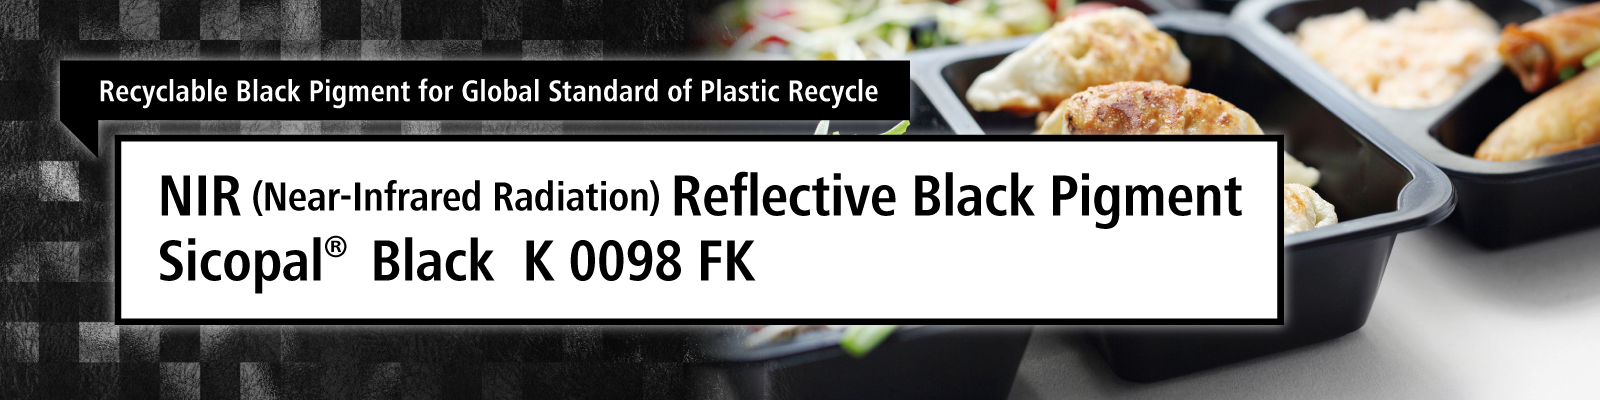 Recyclable Black Pigment for Global Standard of Plastic Recycle